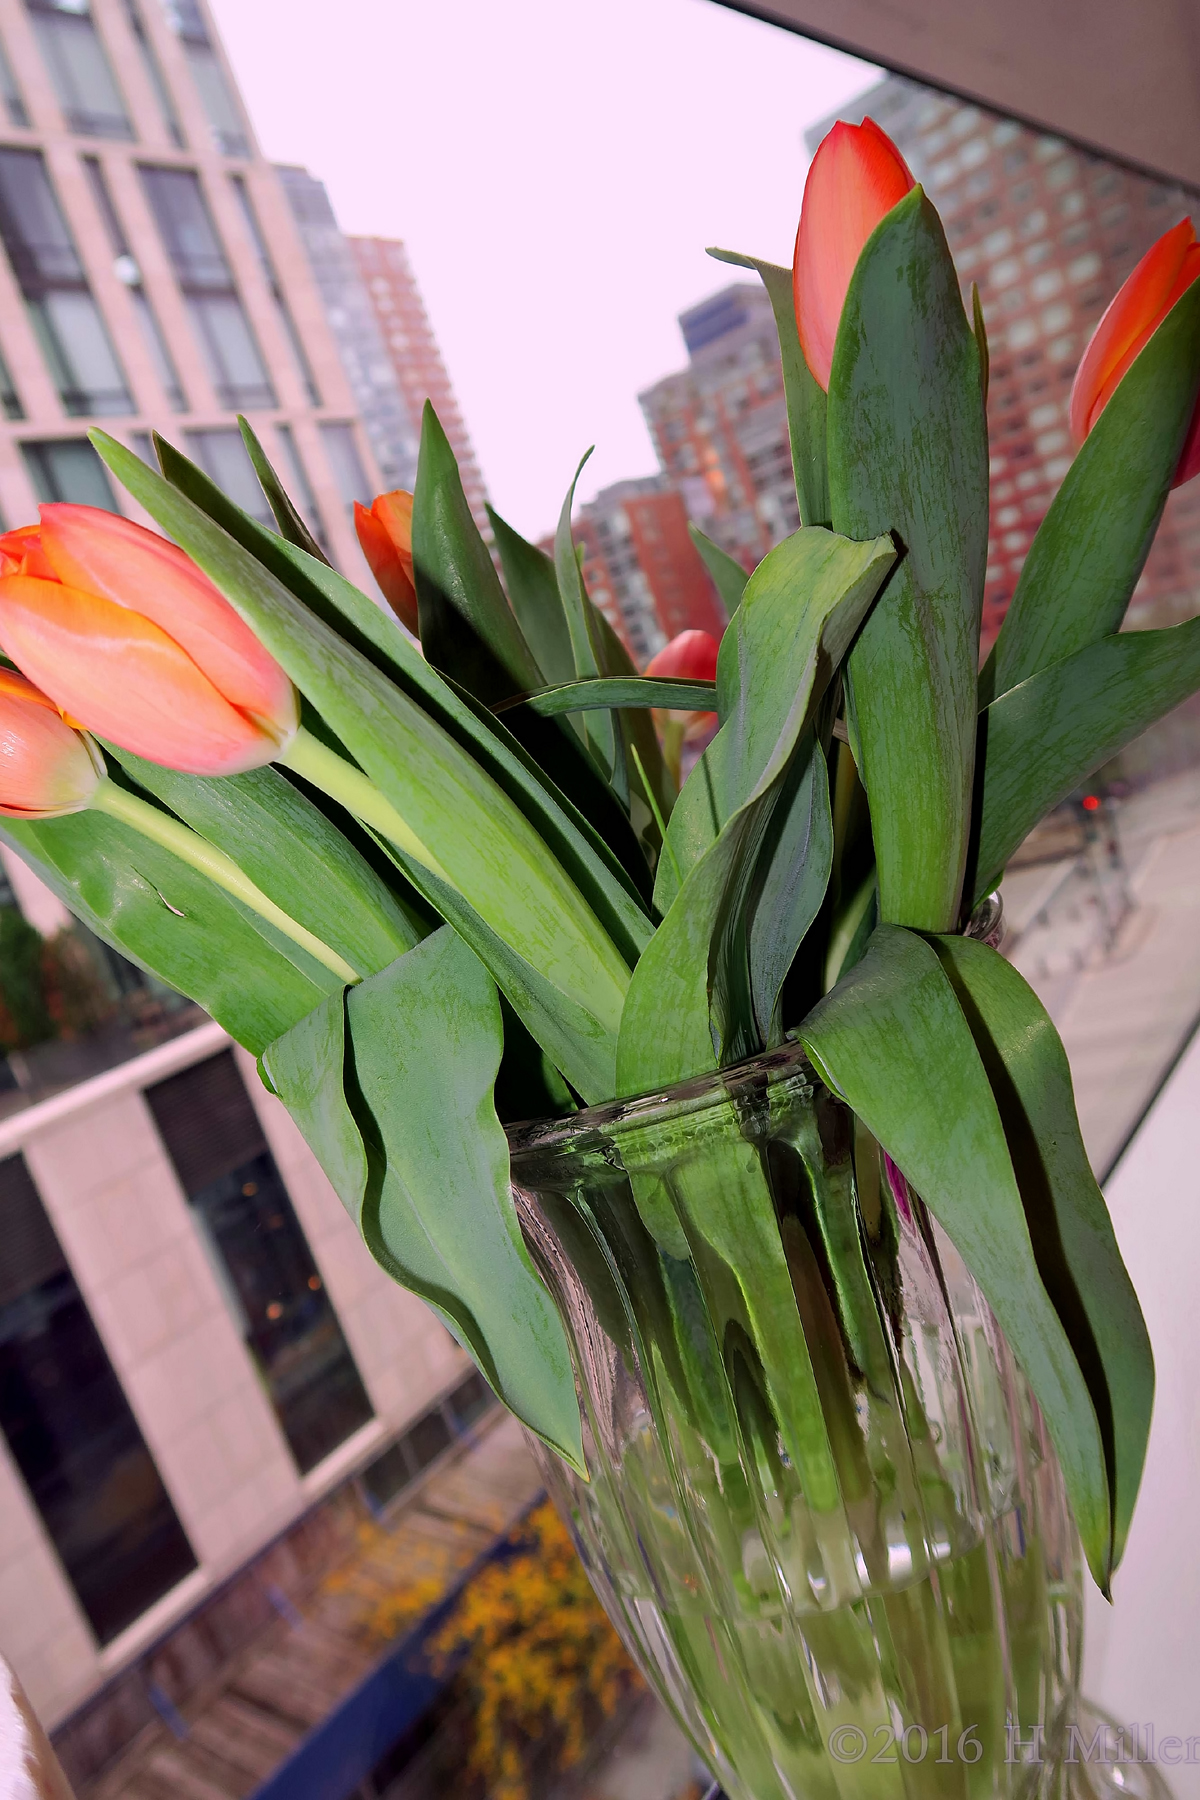 Tulips By The Window With A Great View Of The City. 